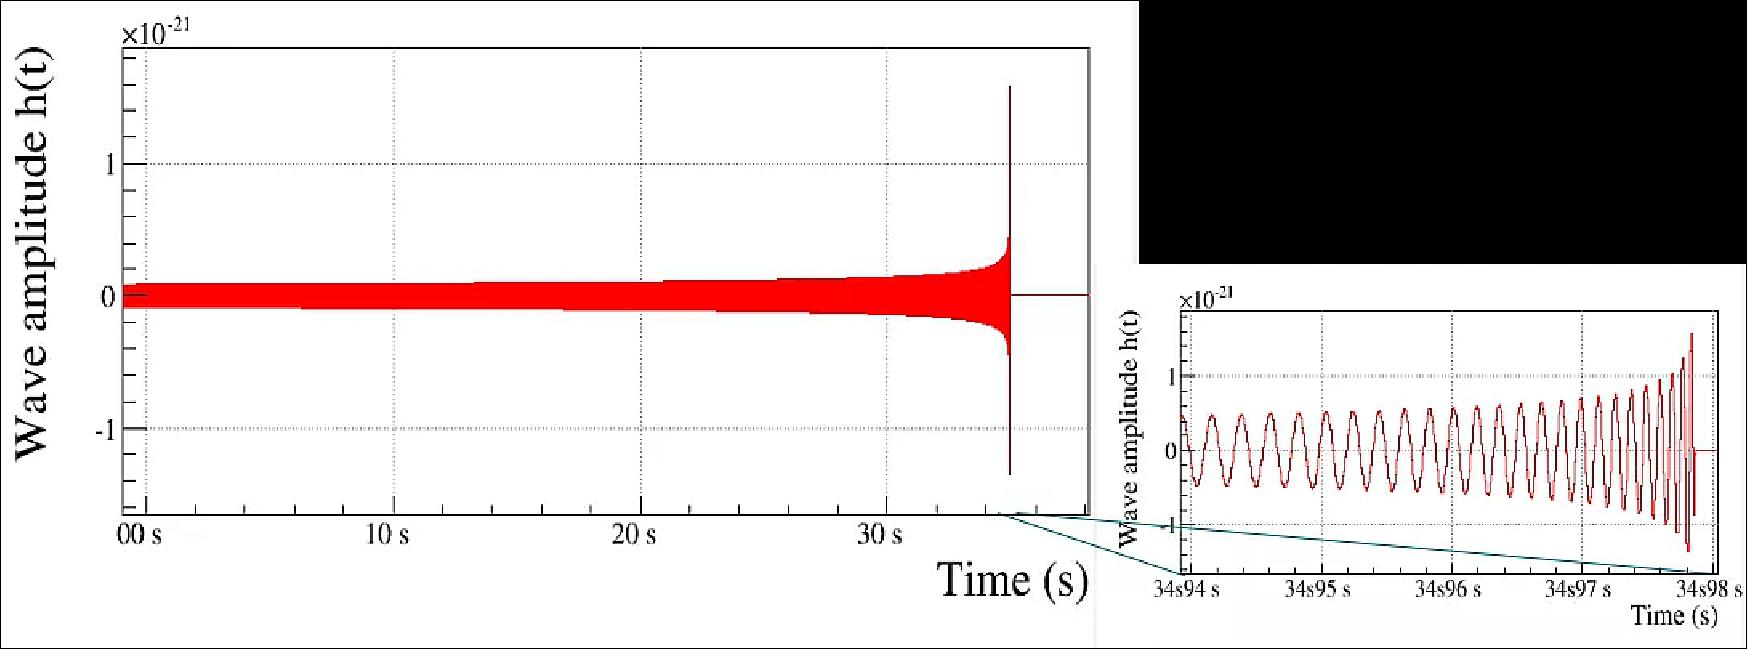 Figure 2: Simulated time series of the amplitude of a gravitational wave generated by the coalescence of two neutron stars located 20 Mpc away from Earth. This gravitational wave would be seen during only 30 s in the Virgo data (image credit: LIGO-Virgo Collaboration)